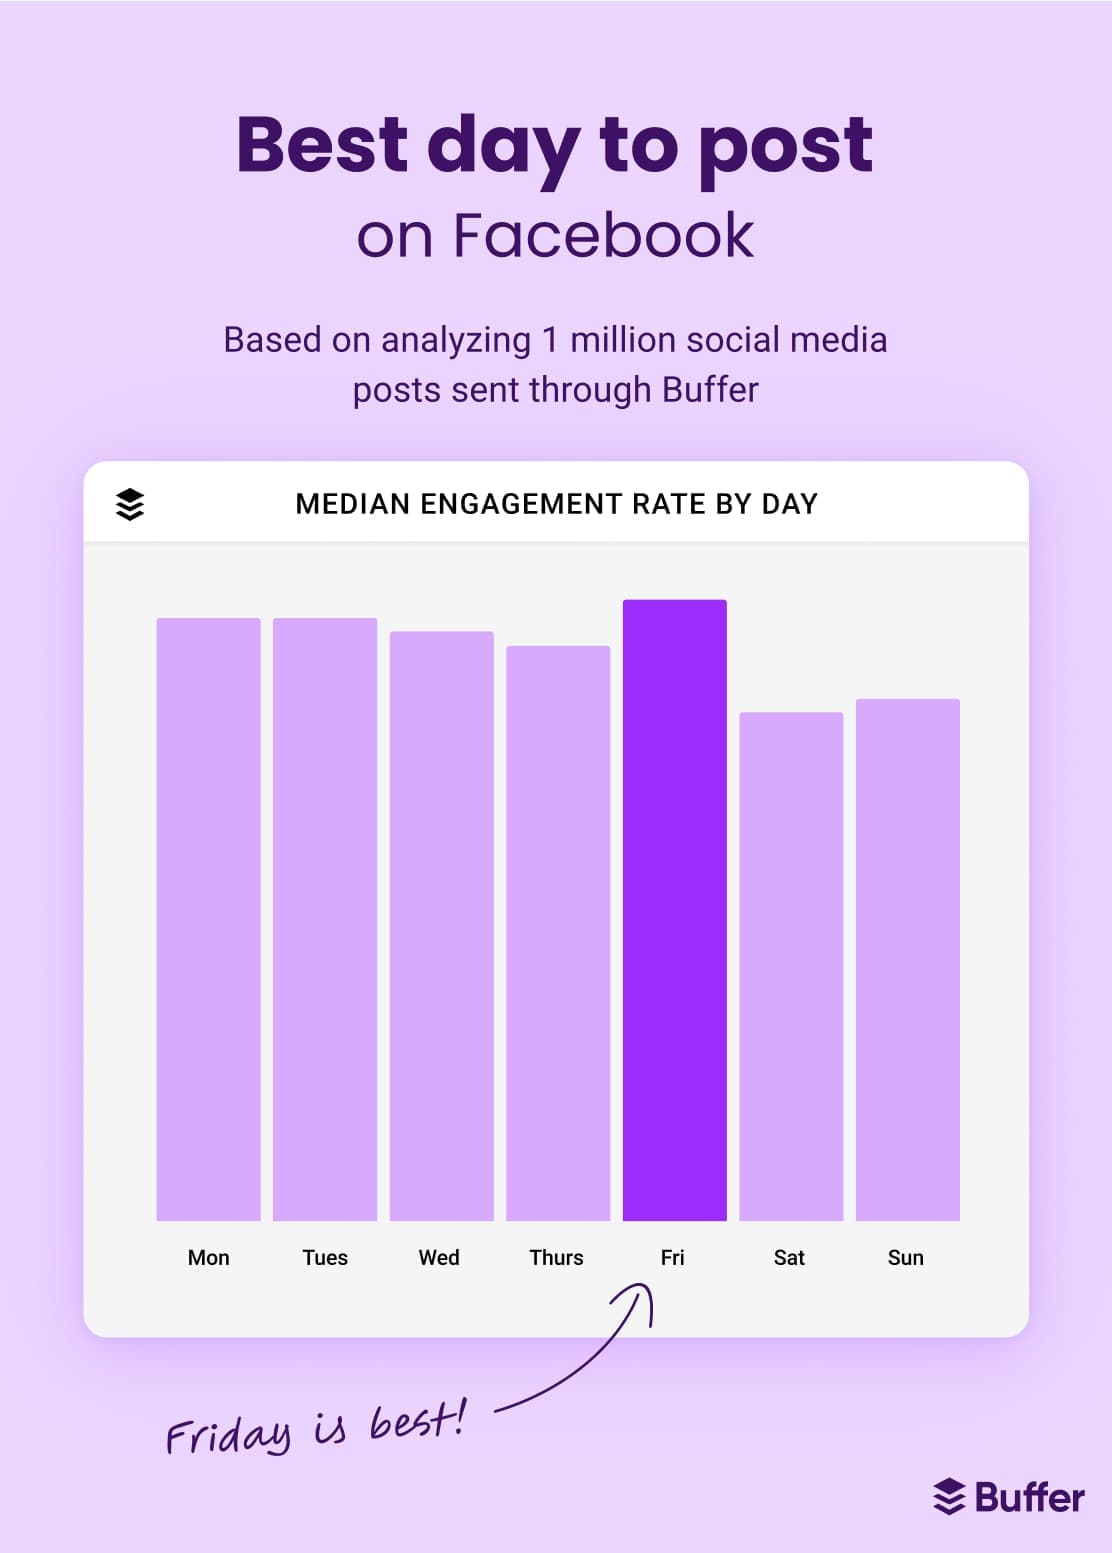 Bar chart of the best day to post on Facebook based on analyzing 1 million social media posts sent through Buffer displaying Friday as the best day to post, followed by Monday, Tuesday, Wednesday, Thursday, Sunday, and lastly Saturday.